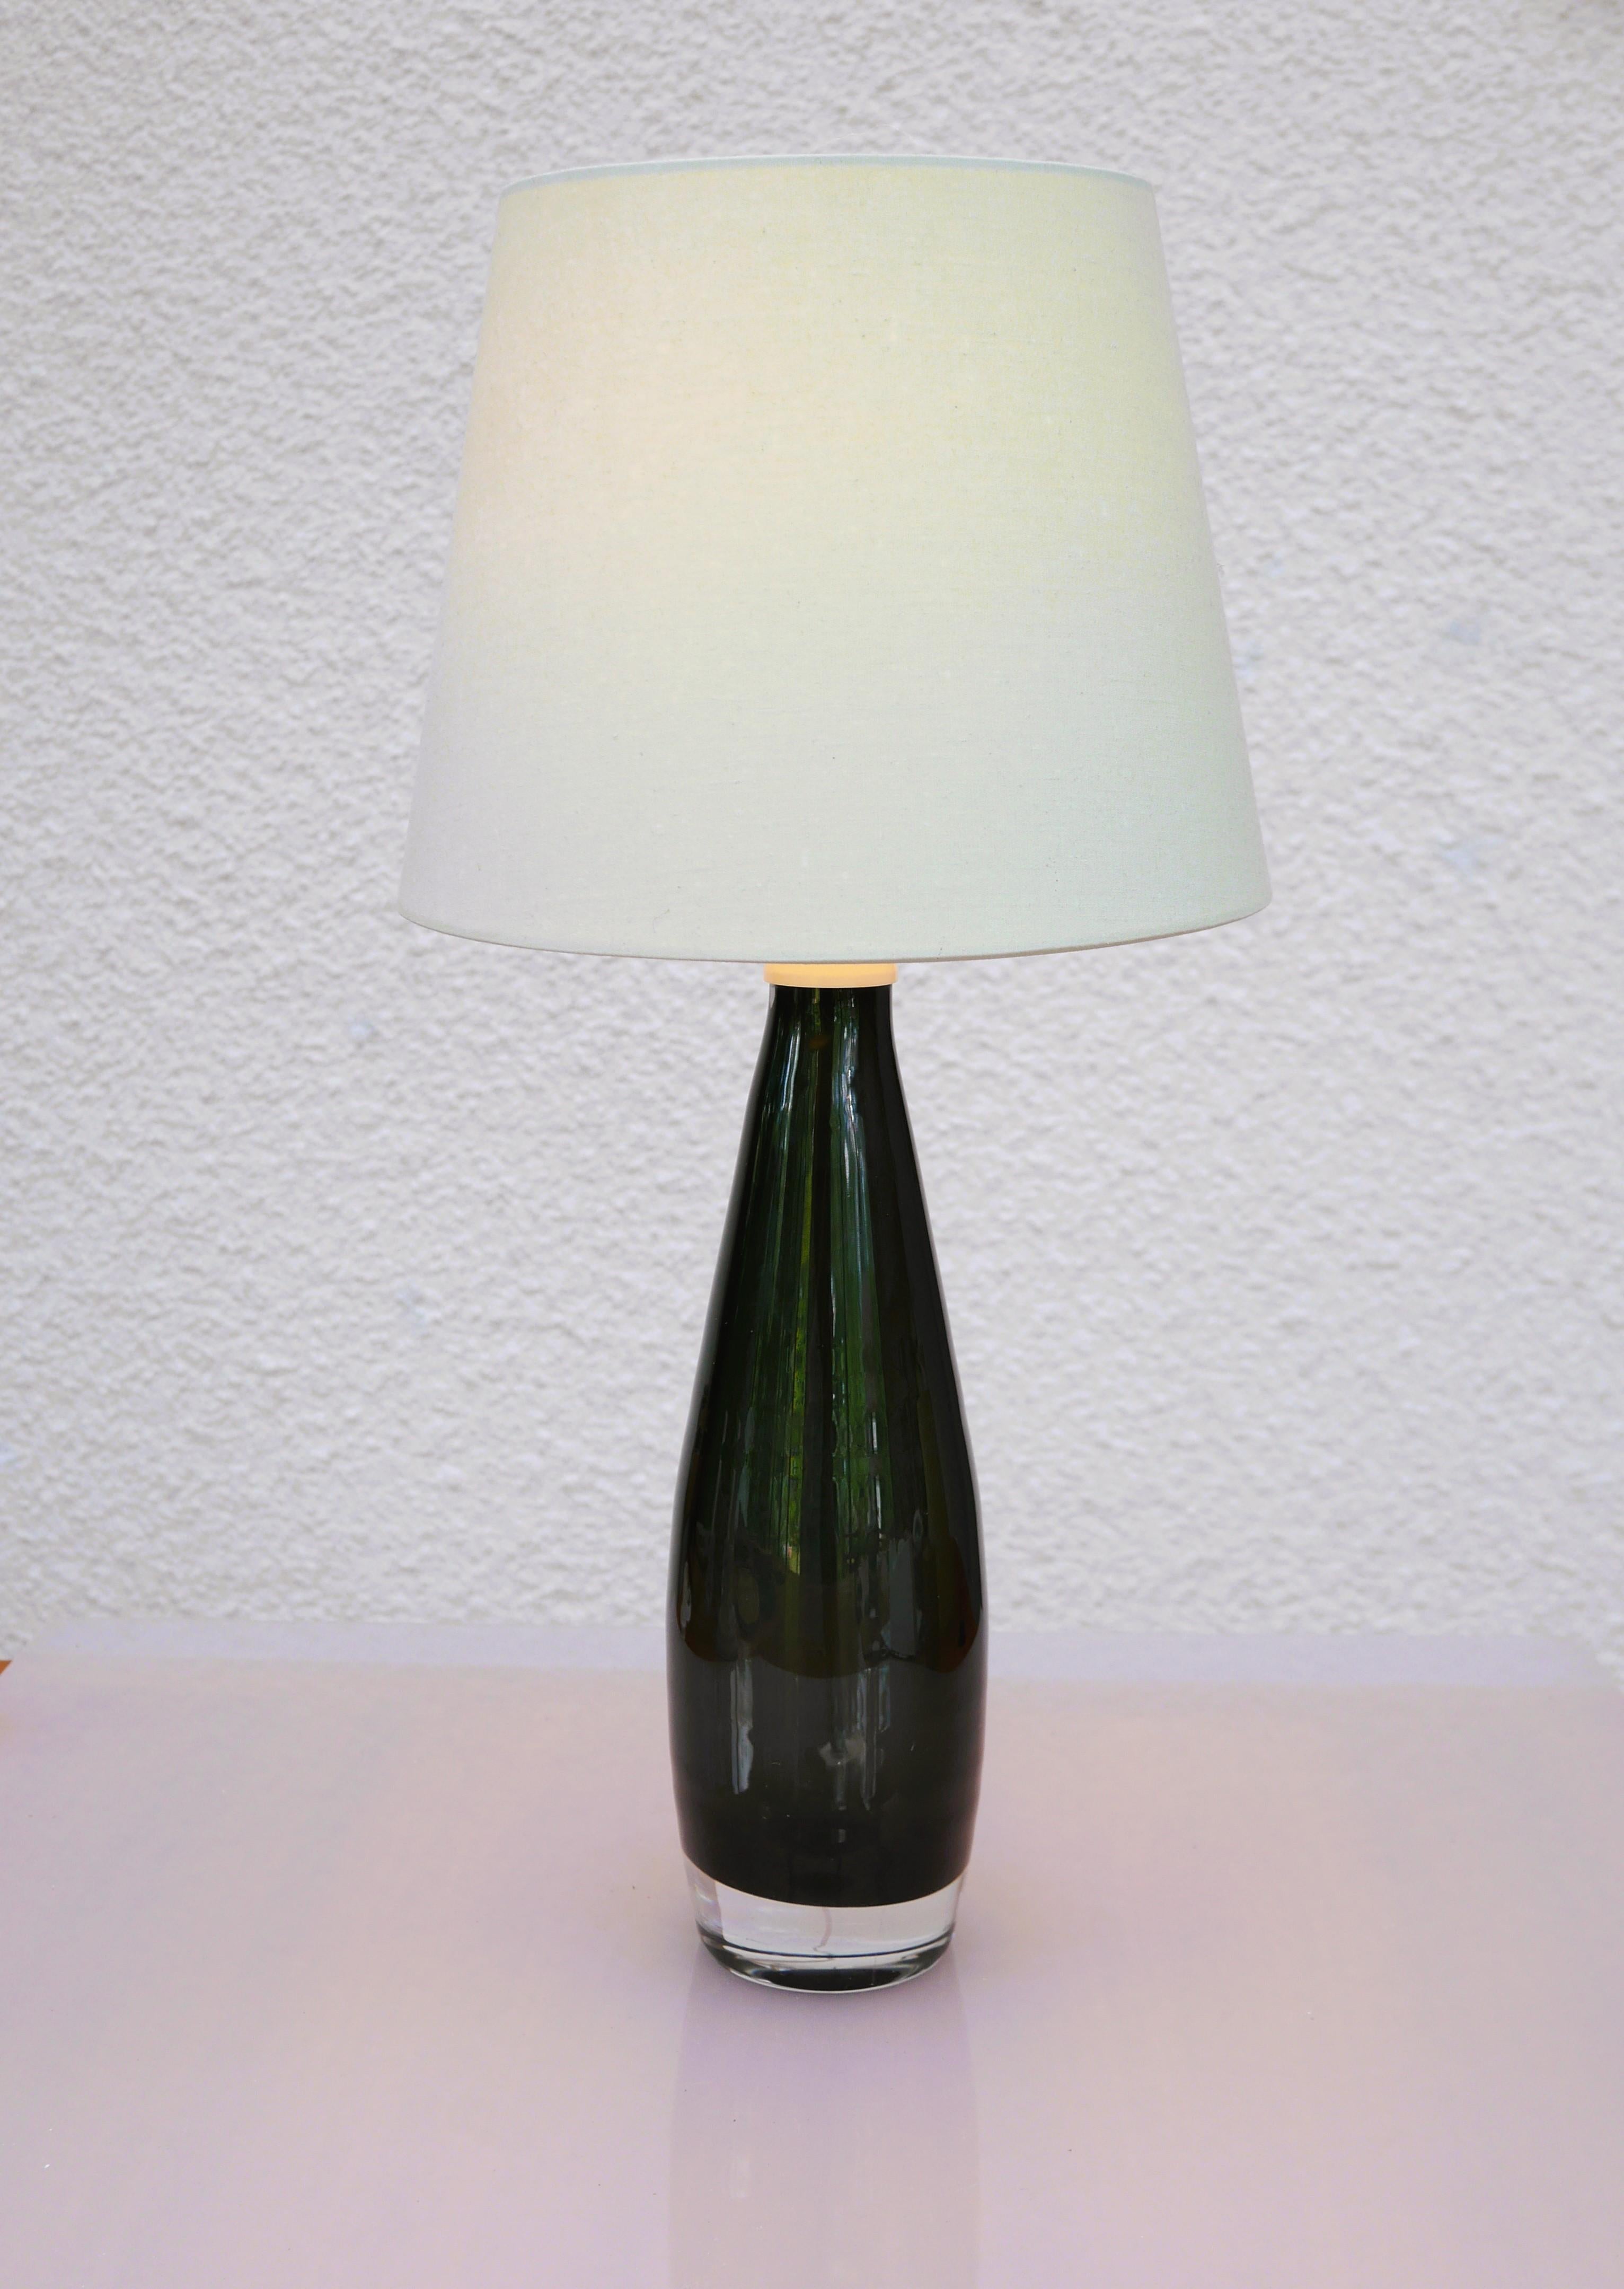 Mid-century Modern sommerso lamp base made and signed by Ove Sandberg Kosta For Sale 1